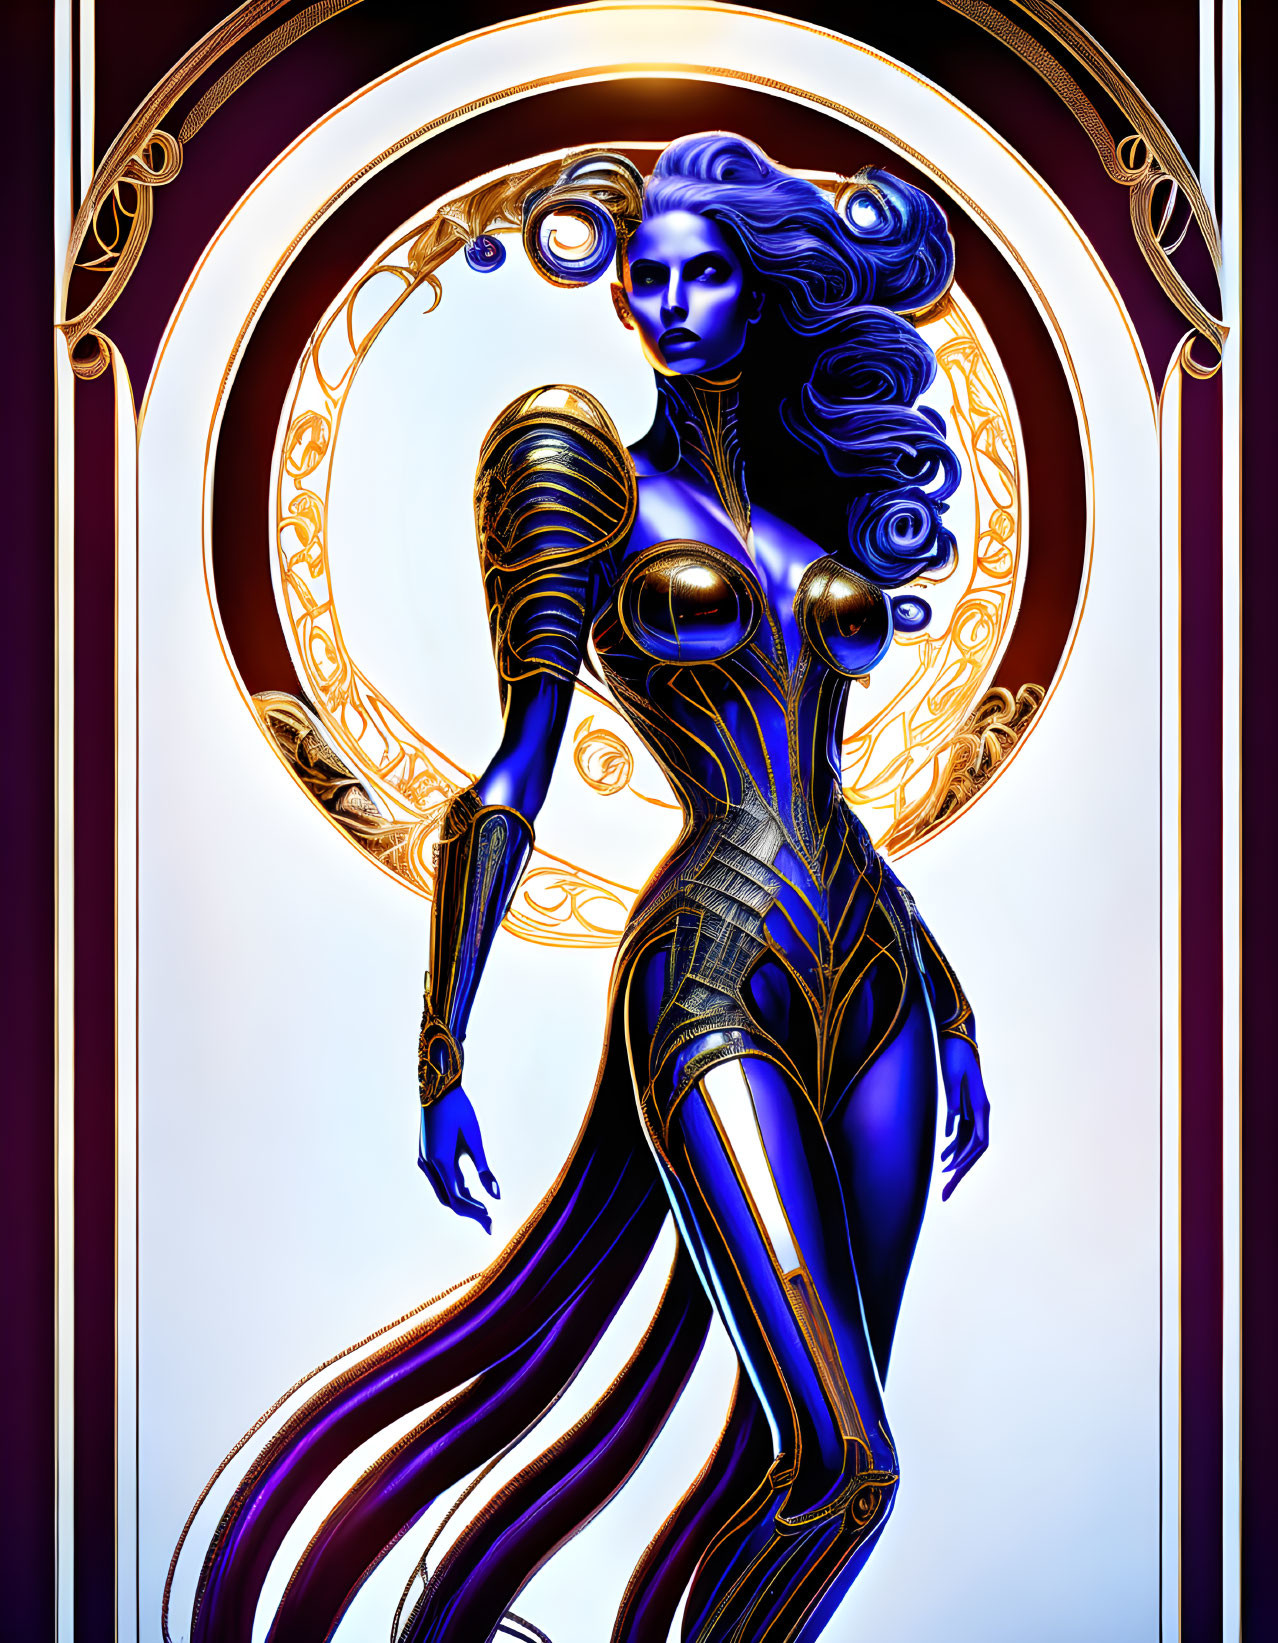 Stylized futuristic digital art: Blue and gold female figure with mechanical elements in ornate circular backdrop